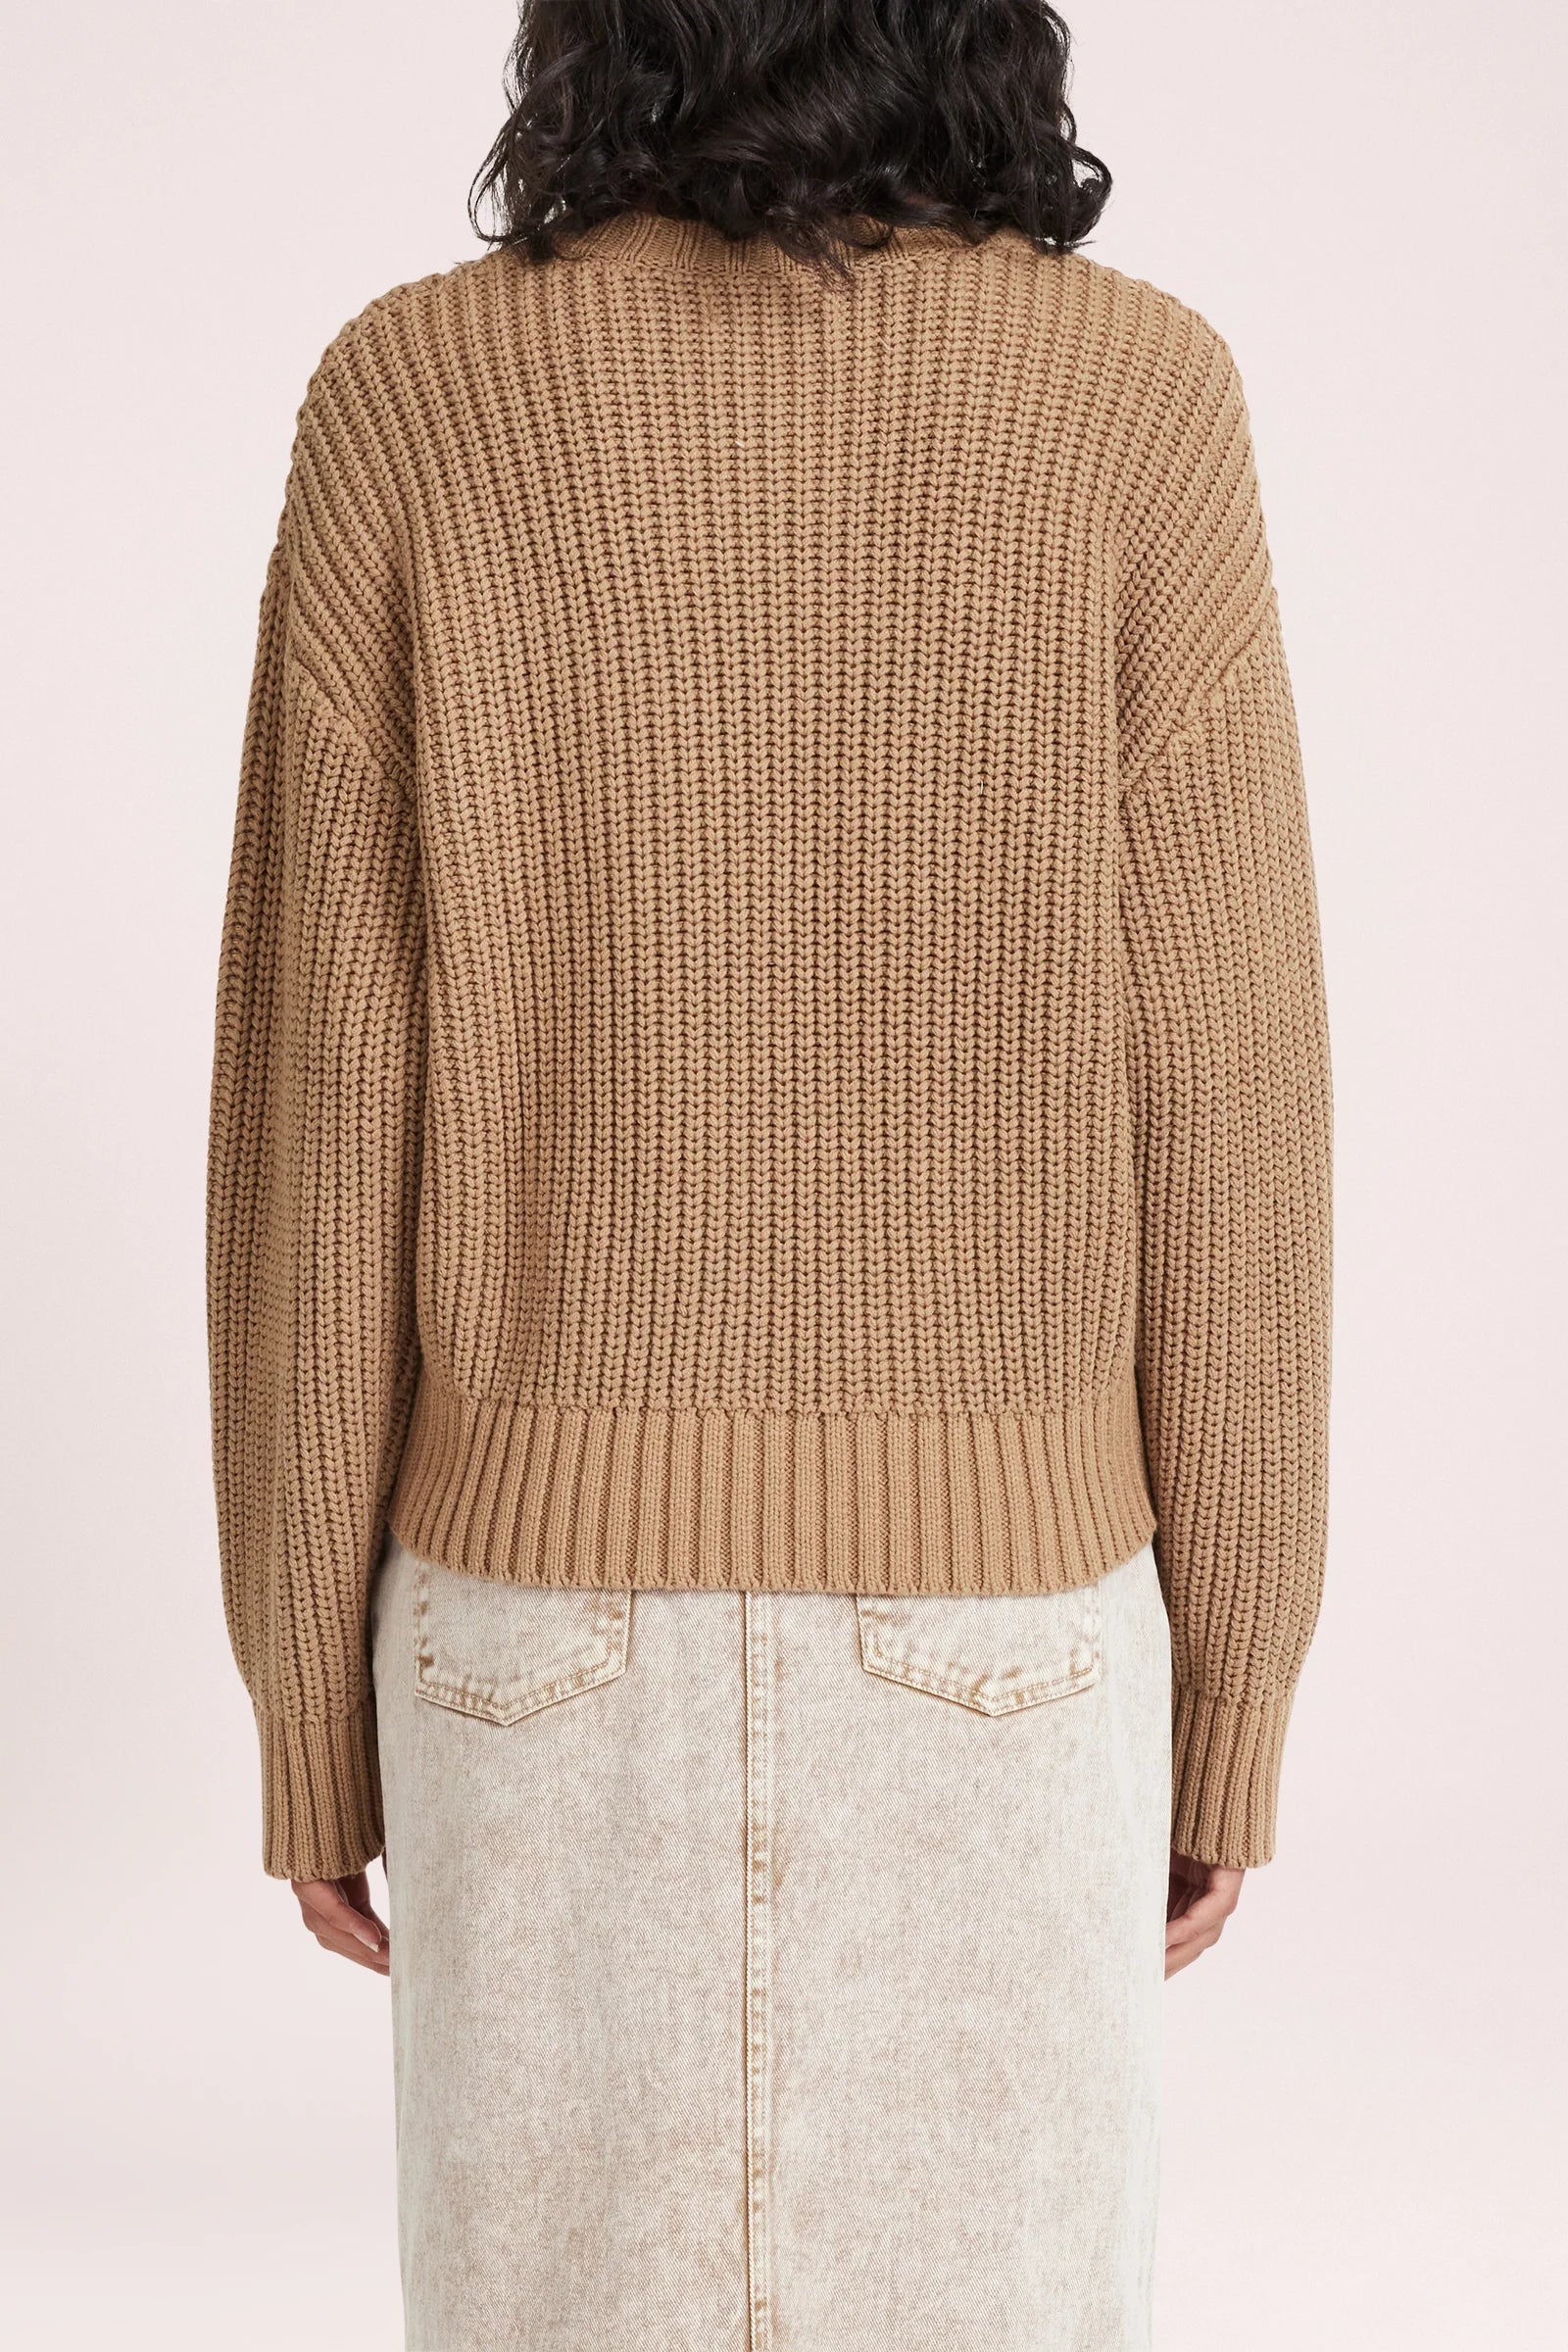 Nude Lucy | Shiloh Knit - Tan